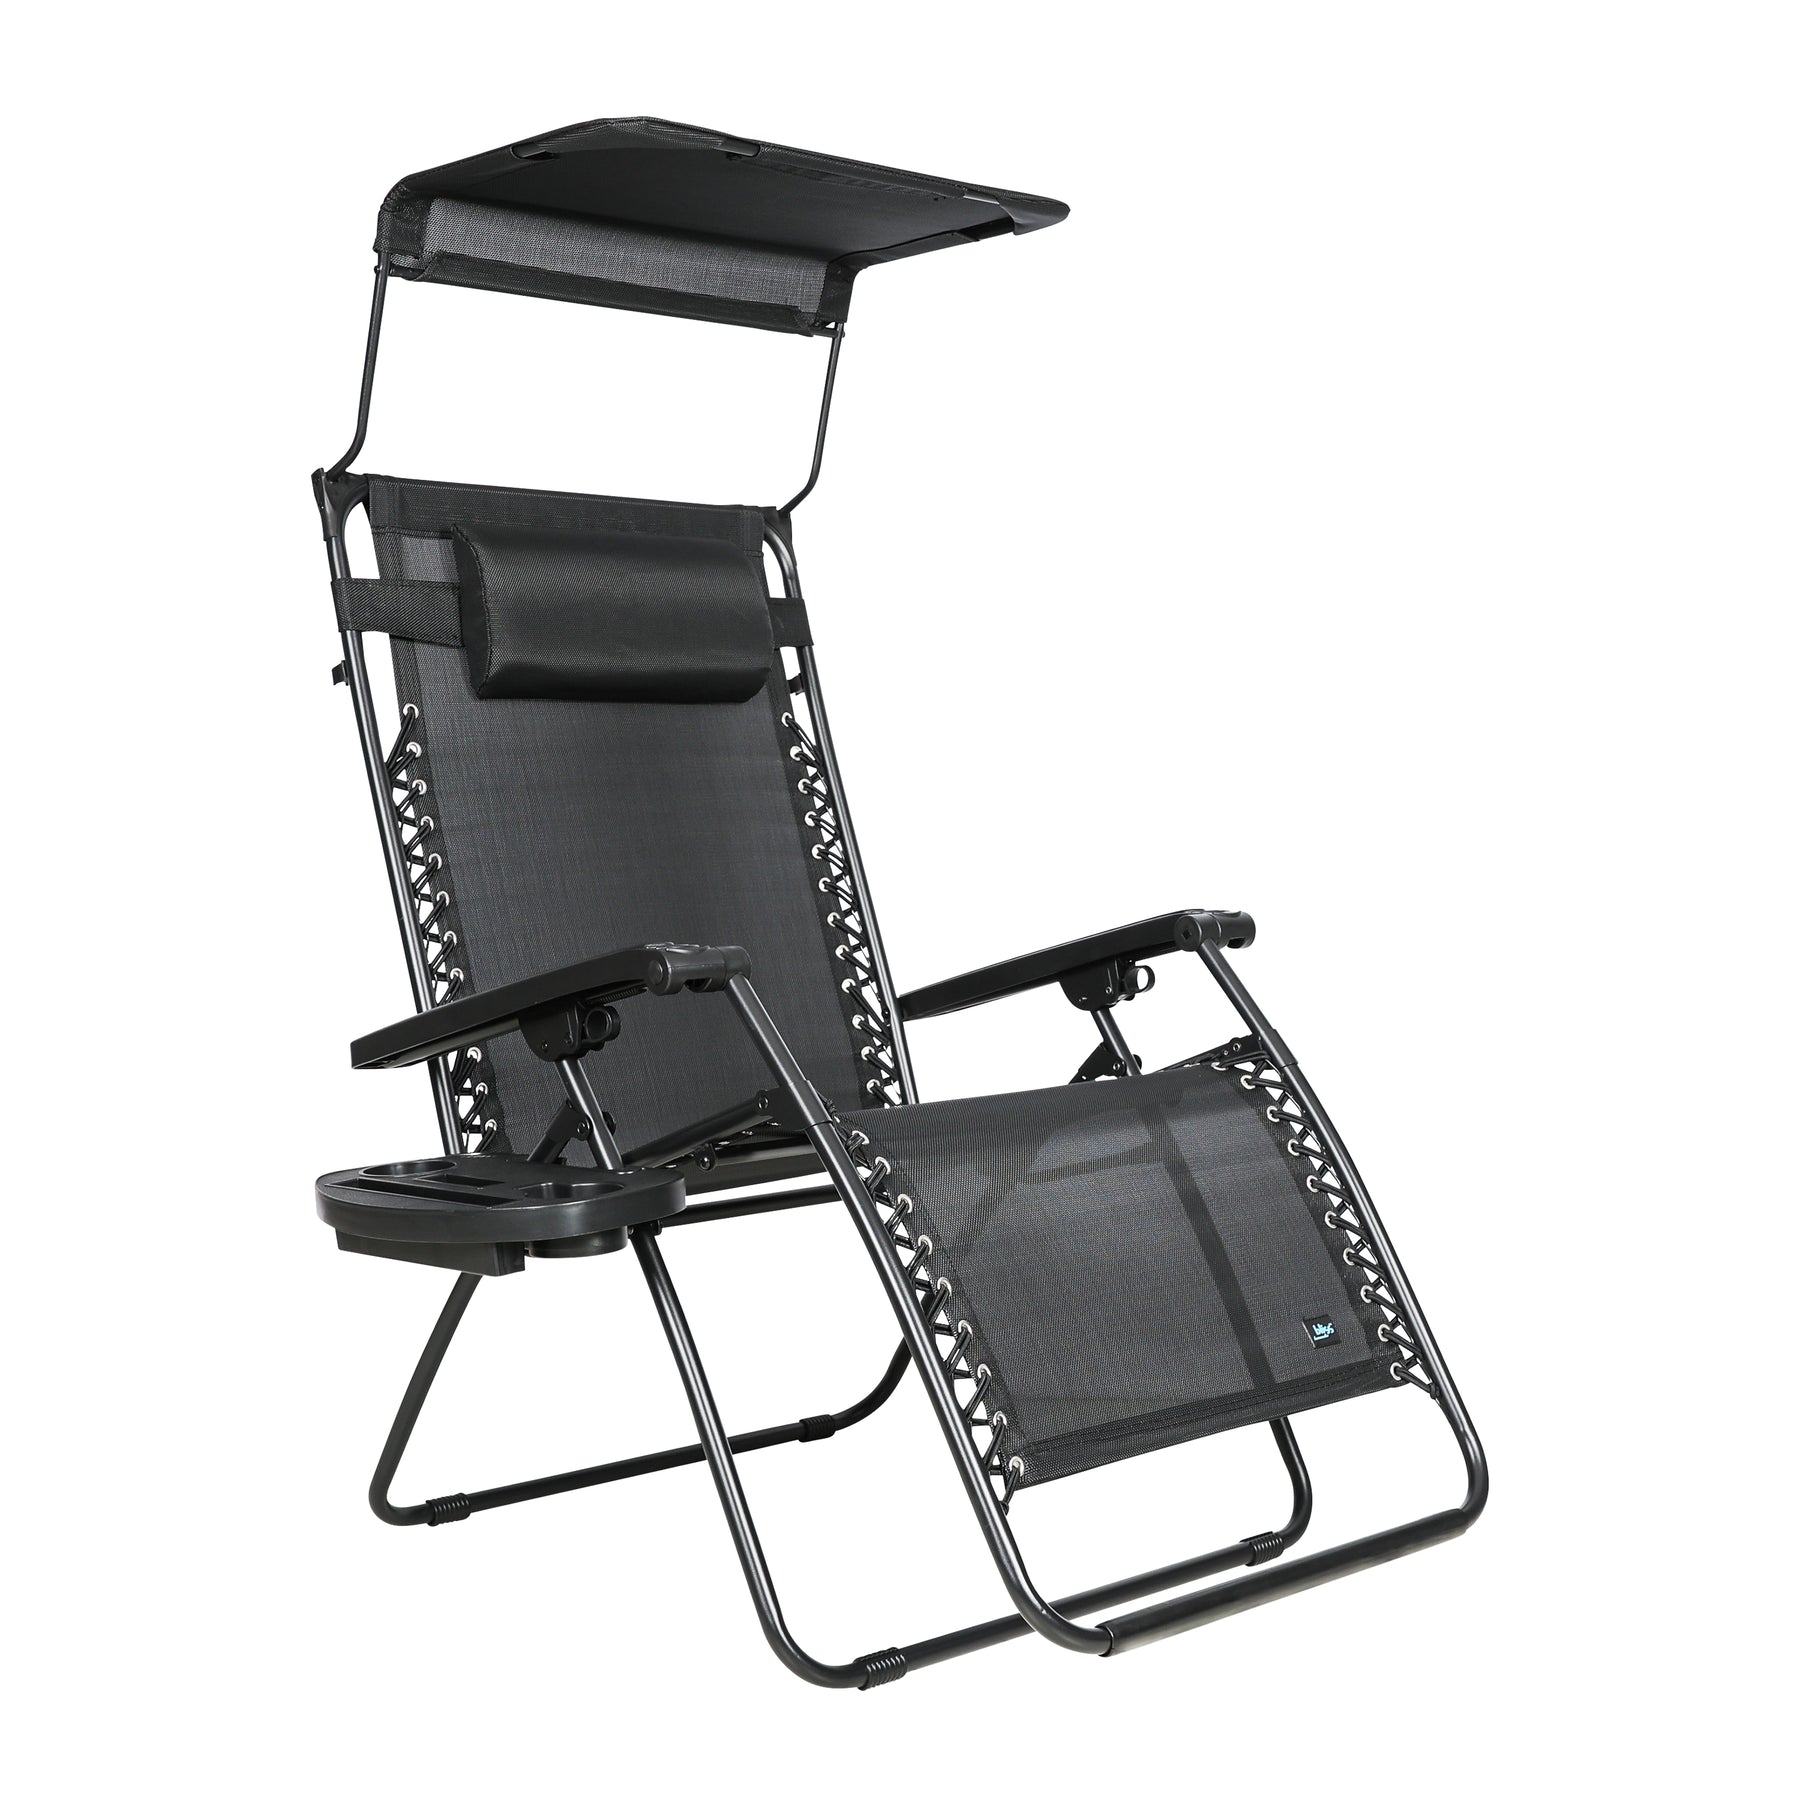 Bliss Hammocks 30-inch Wide XL Zero Gravity Chair with Adjustable Canopy Sun-Shade, Drink Tray, and Adjustable Pillow in the black variation.